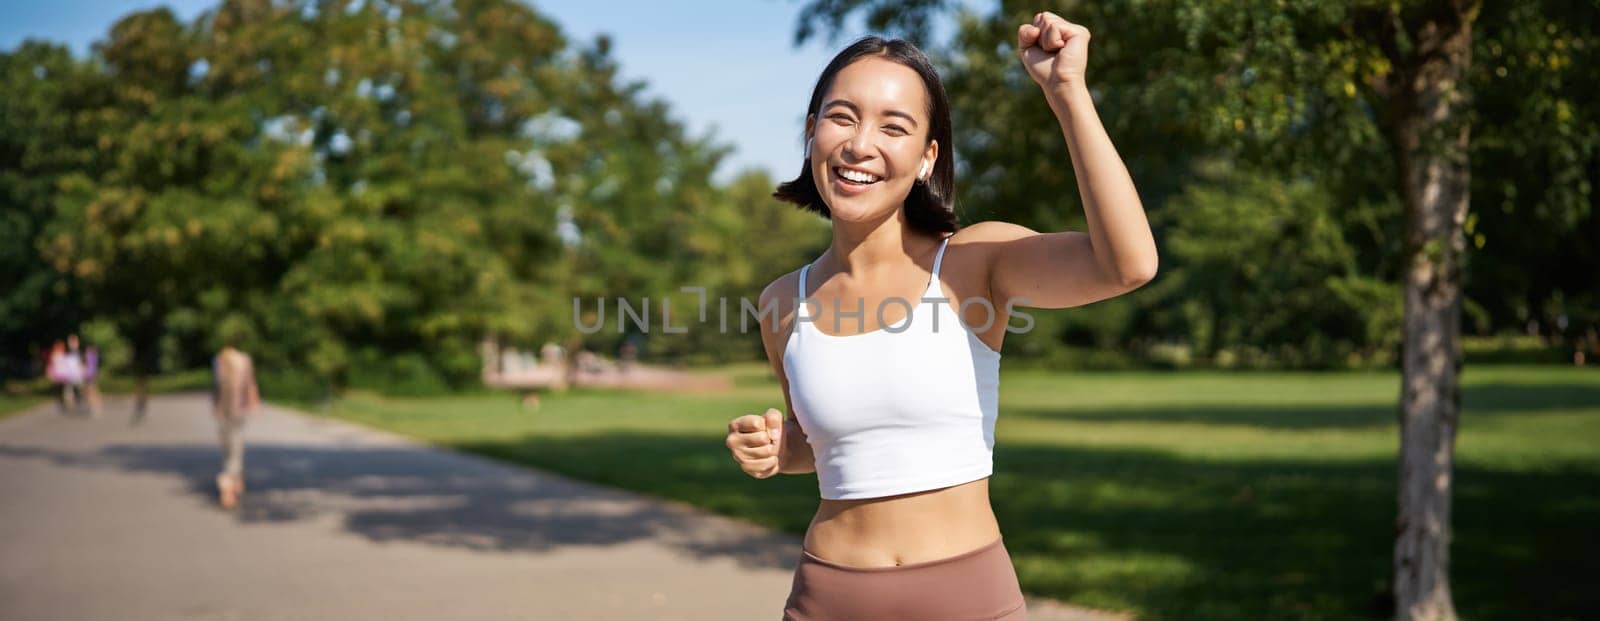 Happy fitness girl achieve goal, finish marathon, running with hands up, celebrating victory while jogging, triumphing in park.